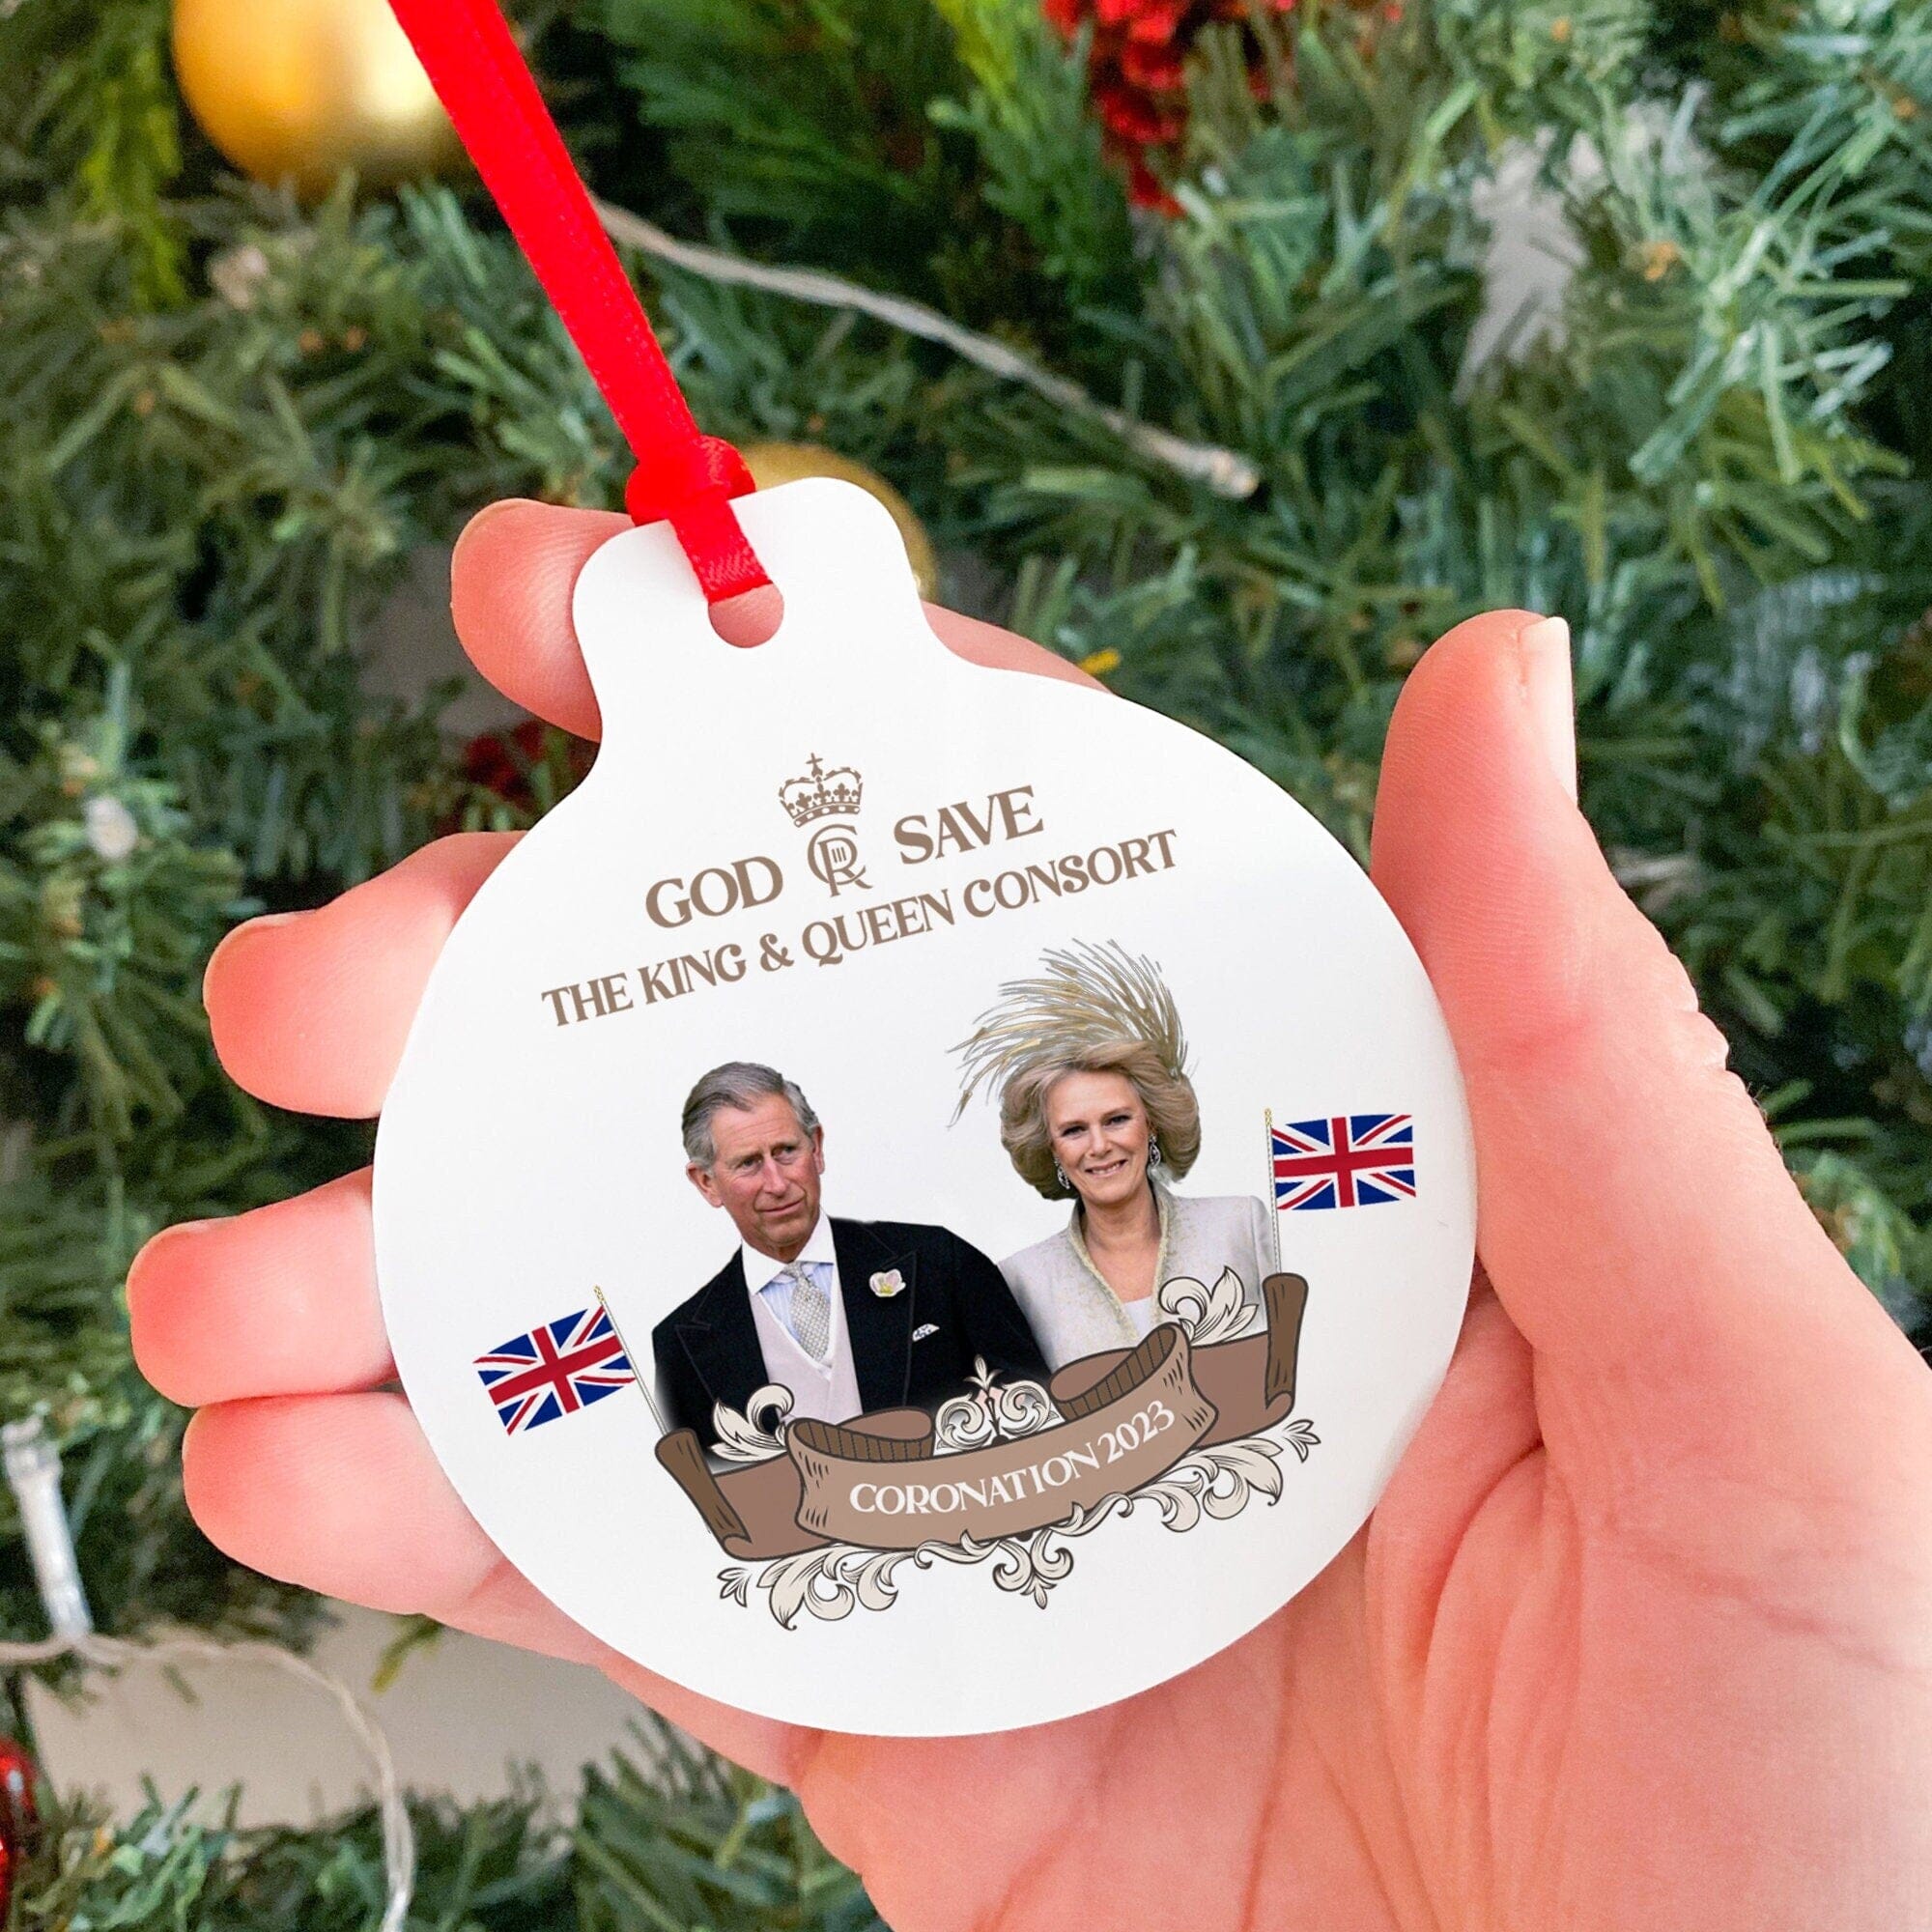 Coronation king and queen consort ornament, HM King Charles III Camilla gift, King souvenir